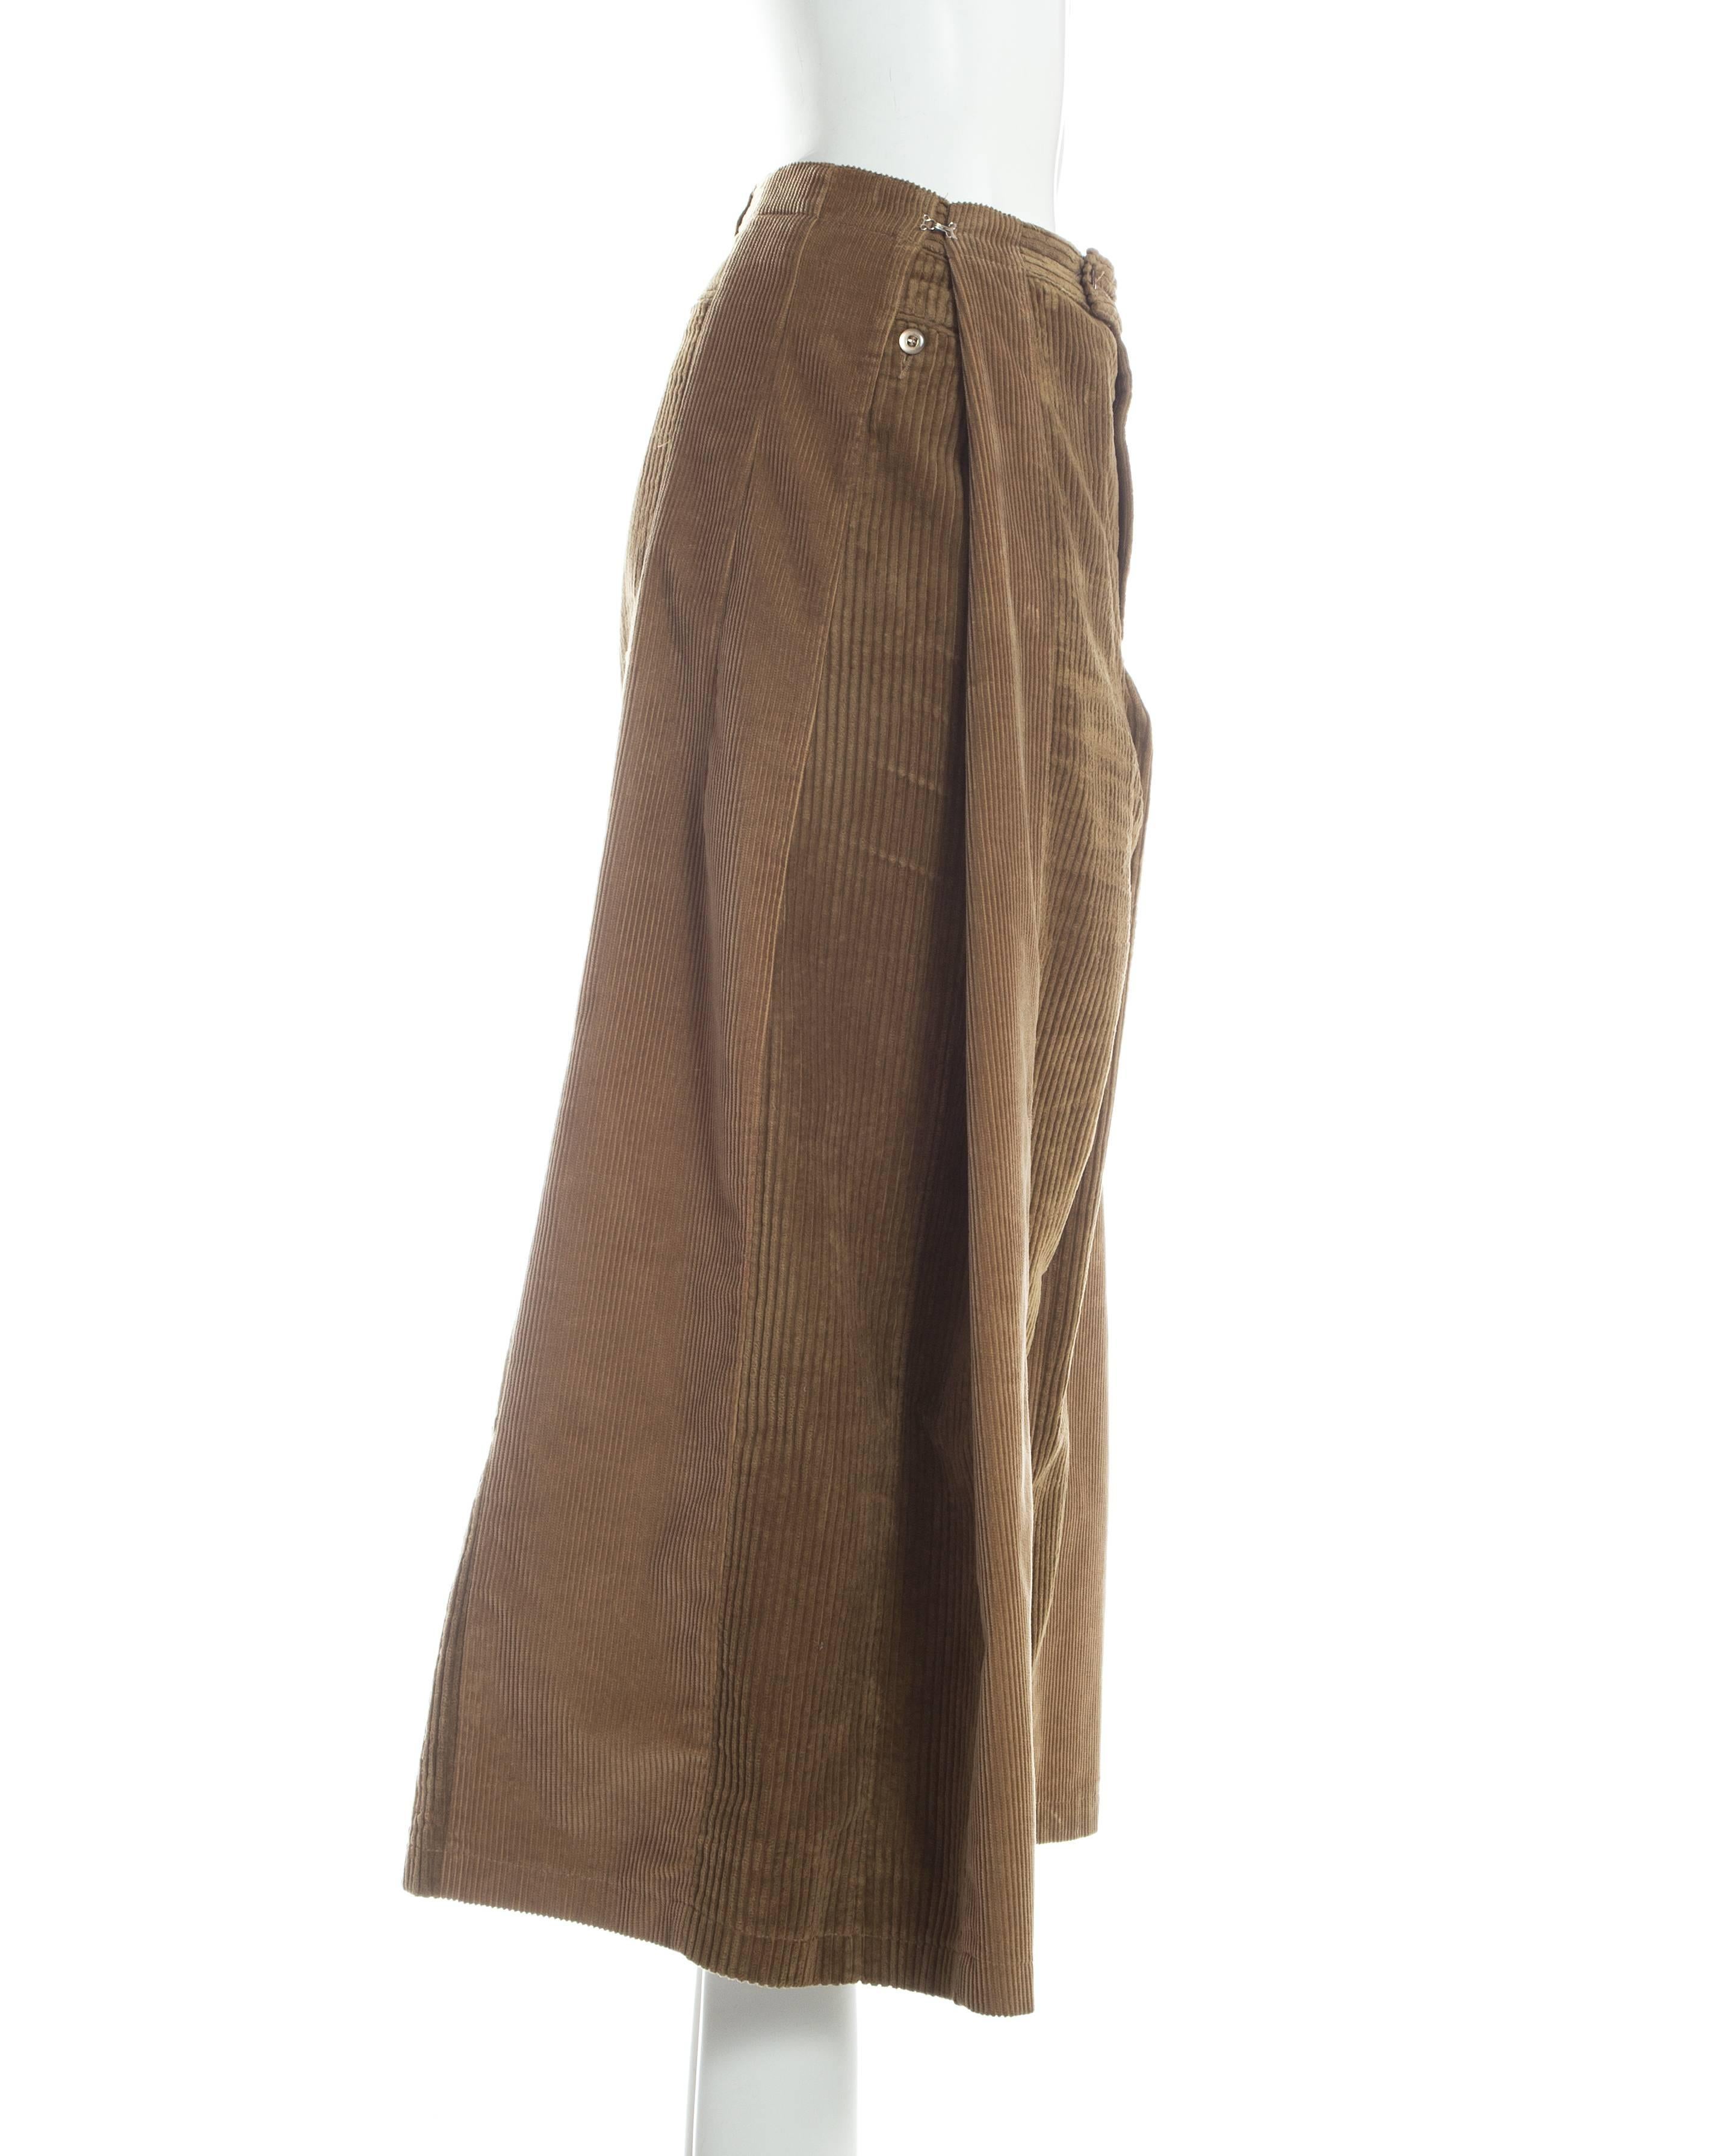 Women's or Men's Margiela XXL Oversized pants made from two vintage corduroy pants, ca. 2000-3